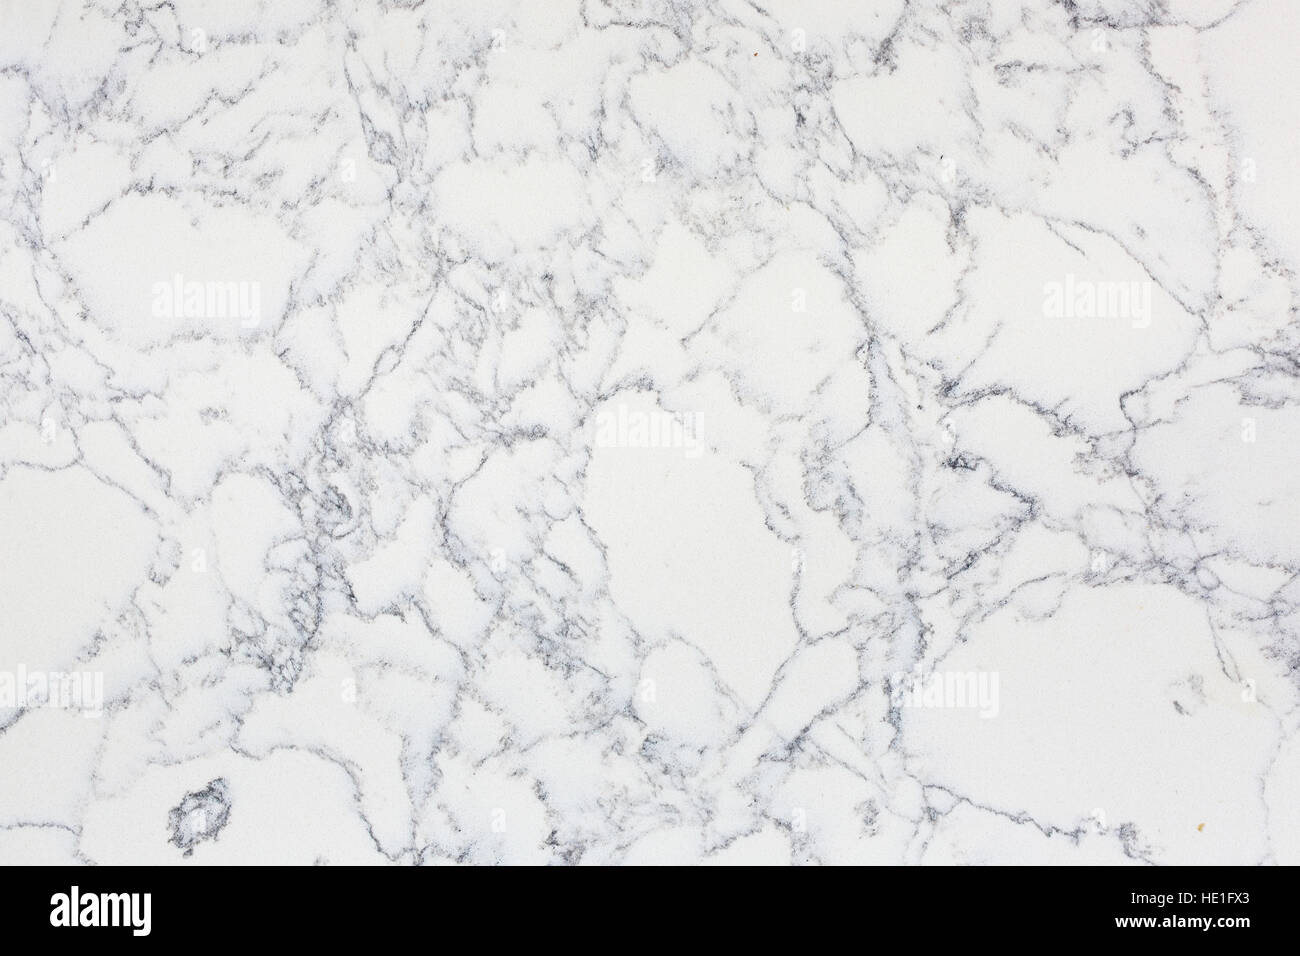 Gray patterned detailed structure of white marble texture and background for product design Stock Photo